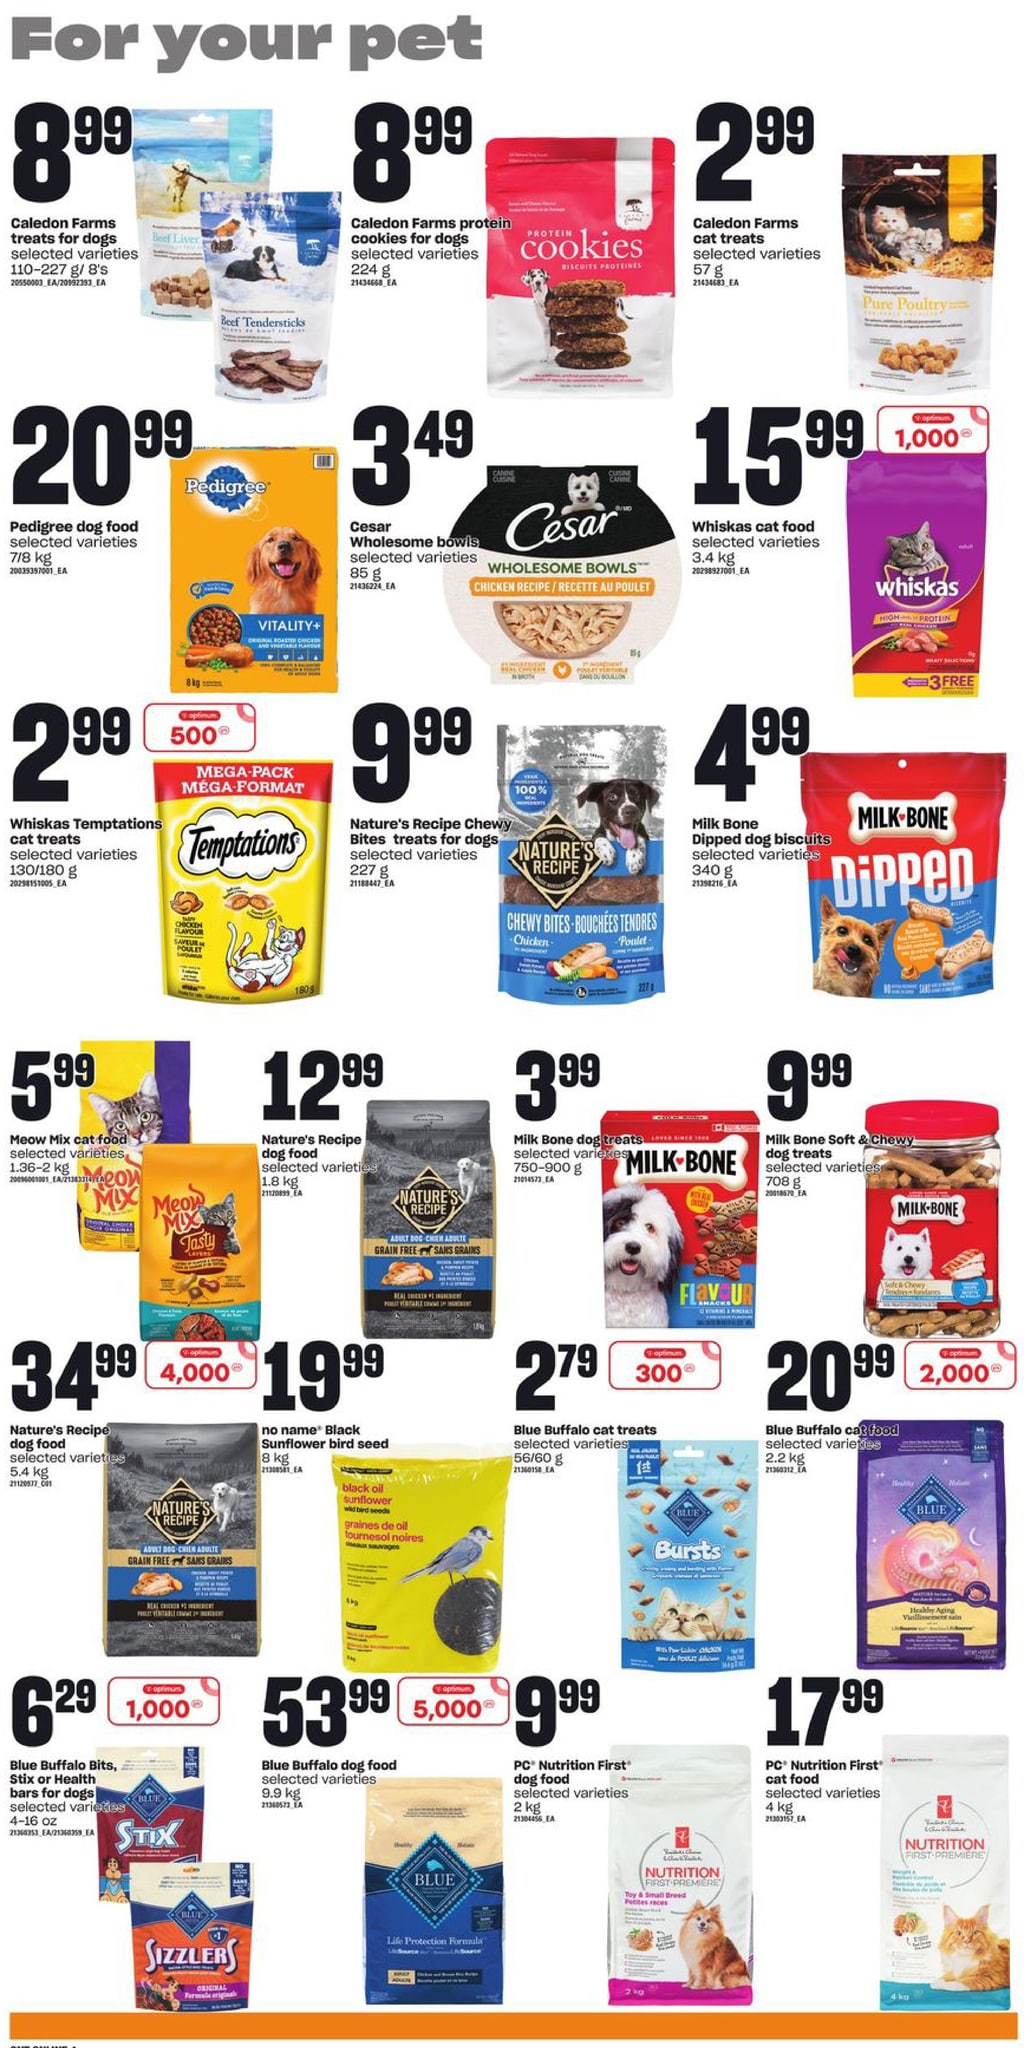 Zehrs - Weekly Flyer Specials - Page 9